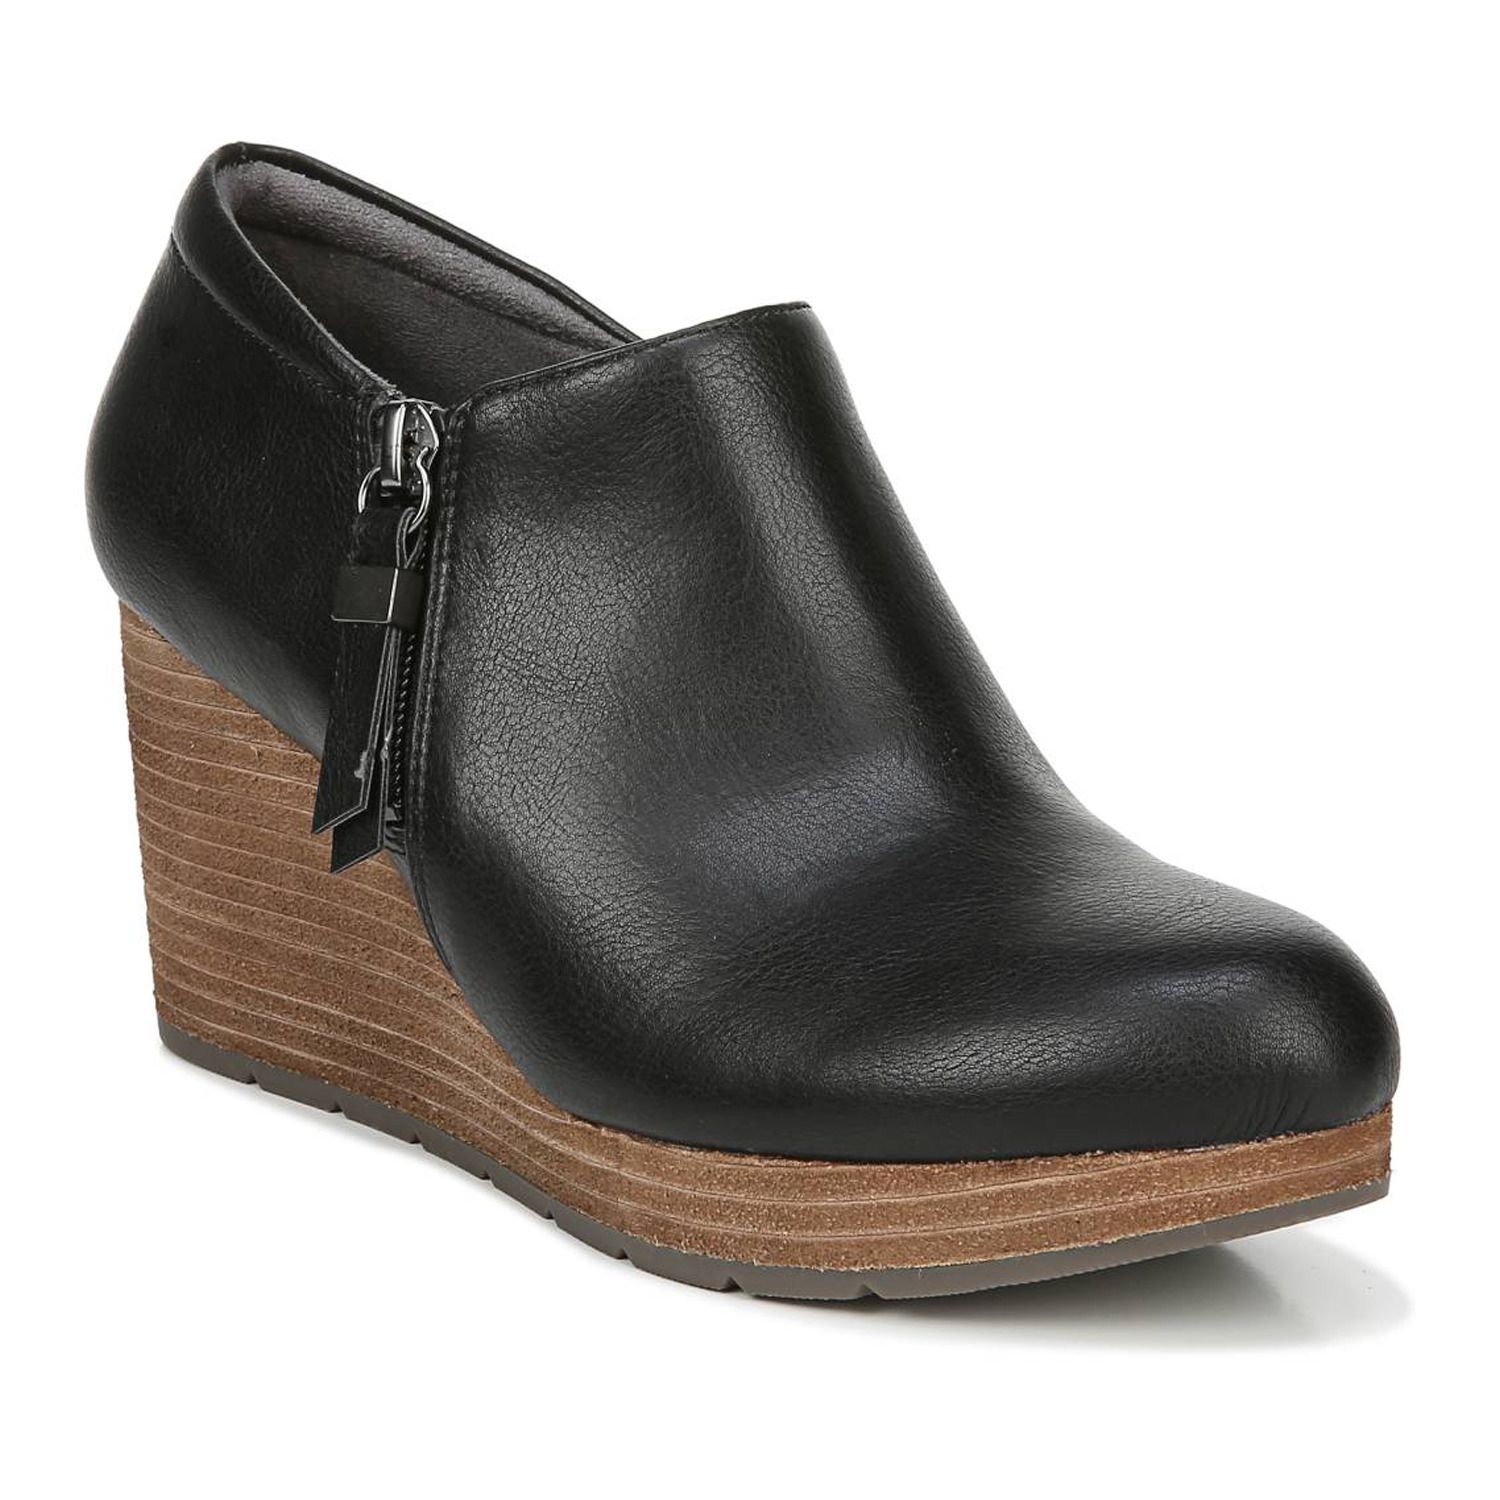 dr scholl's kennedy wedge